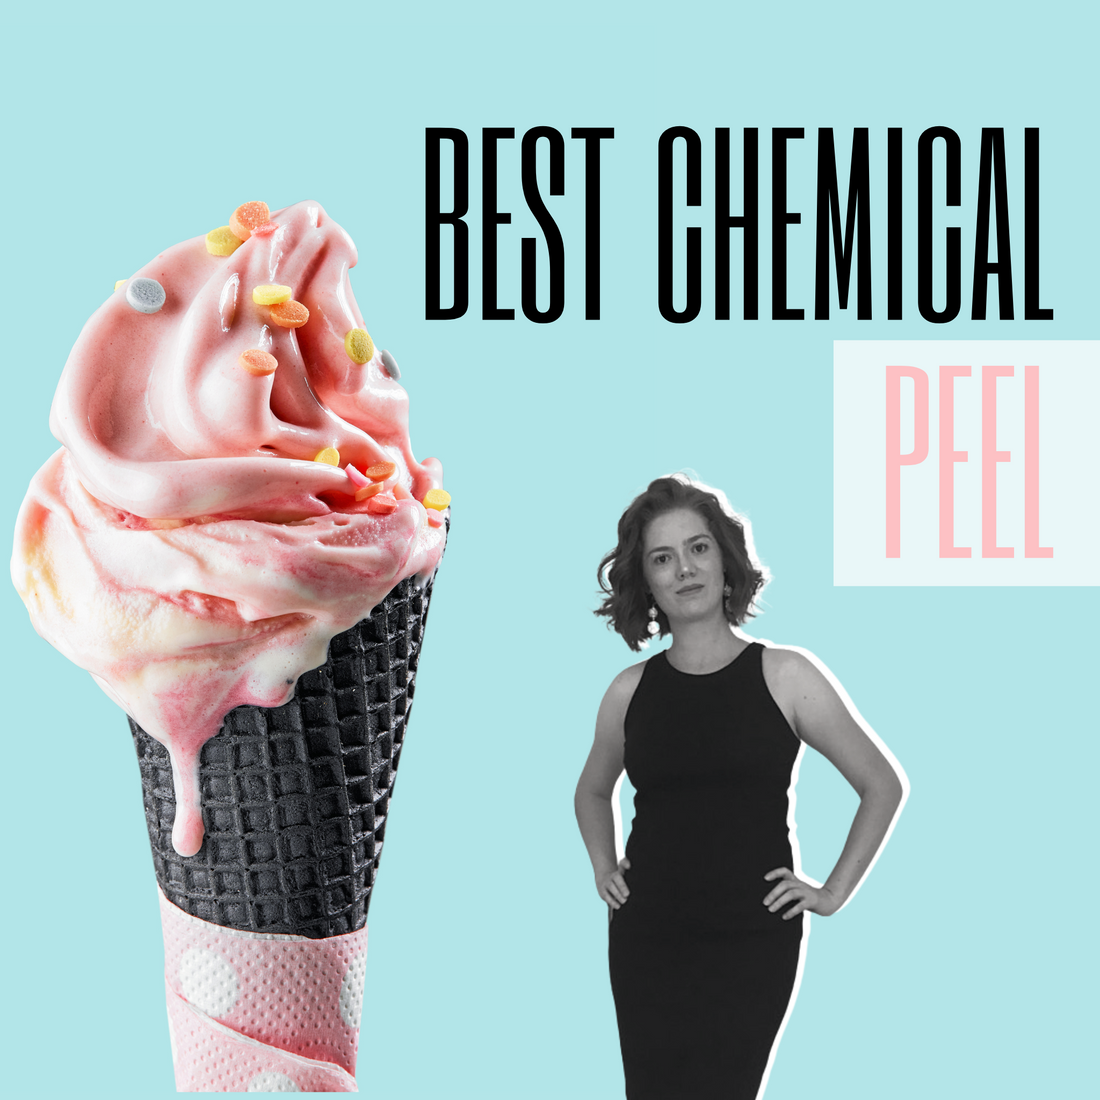 Best chemical peel for your unique skin type